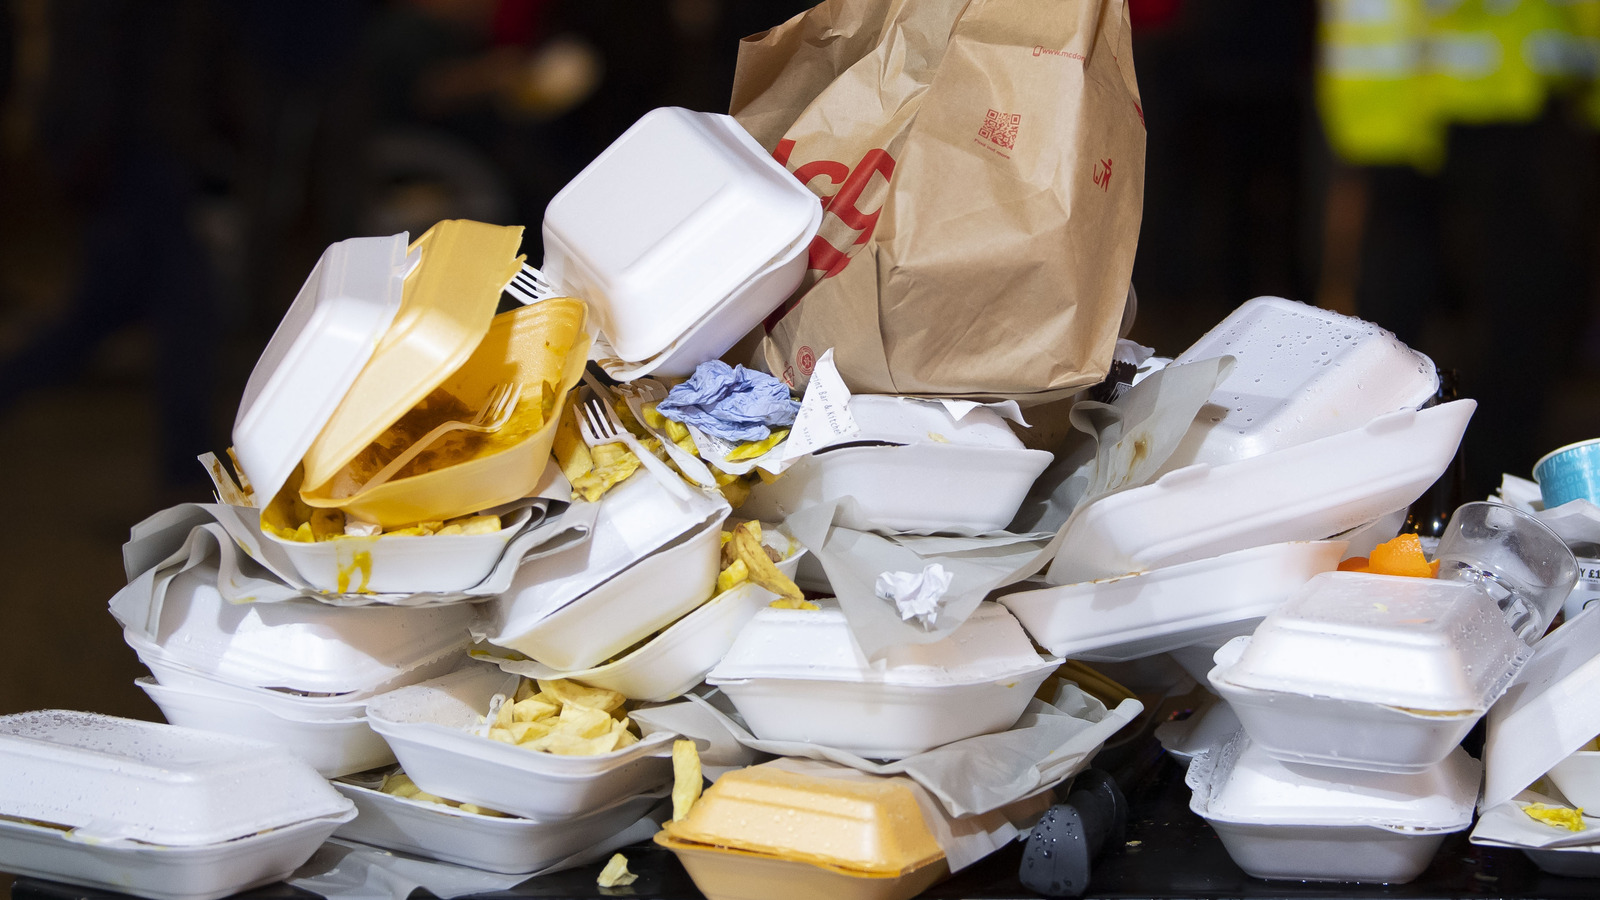 This Is How Much Food Gets Wasted In America Every Year